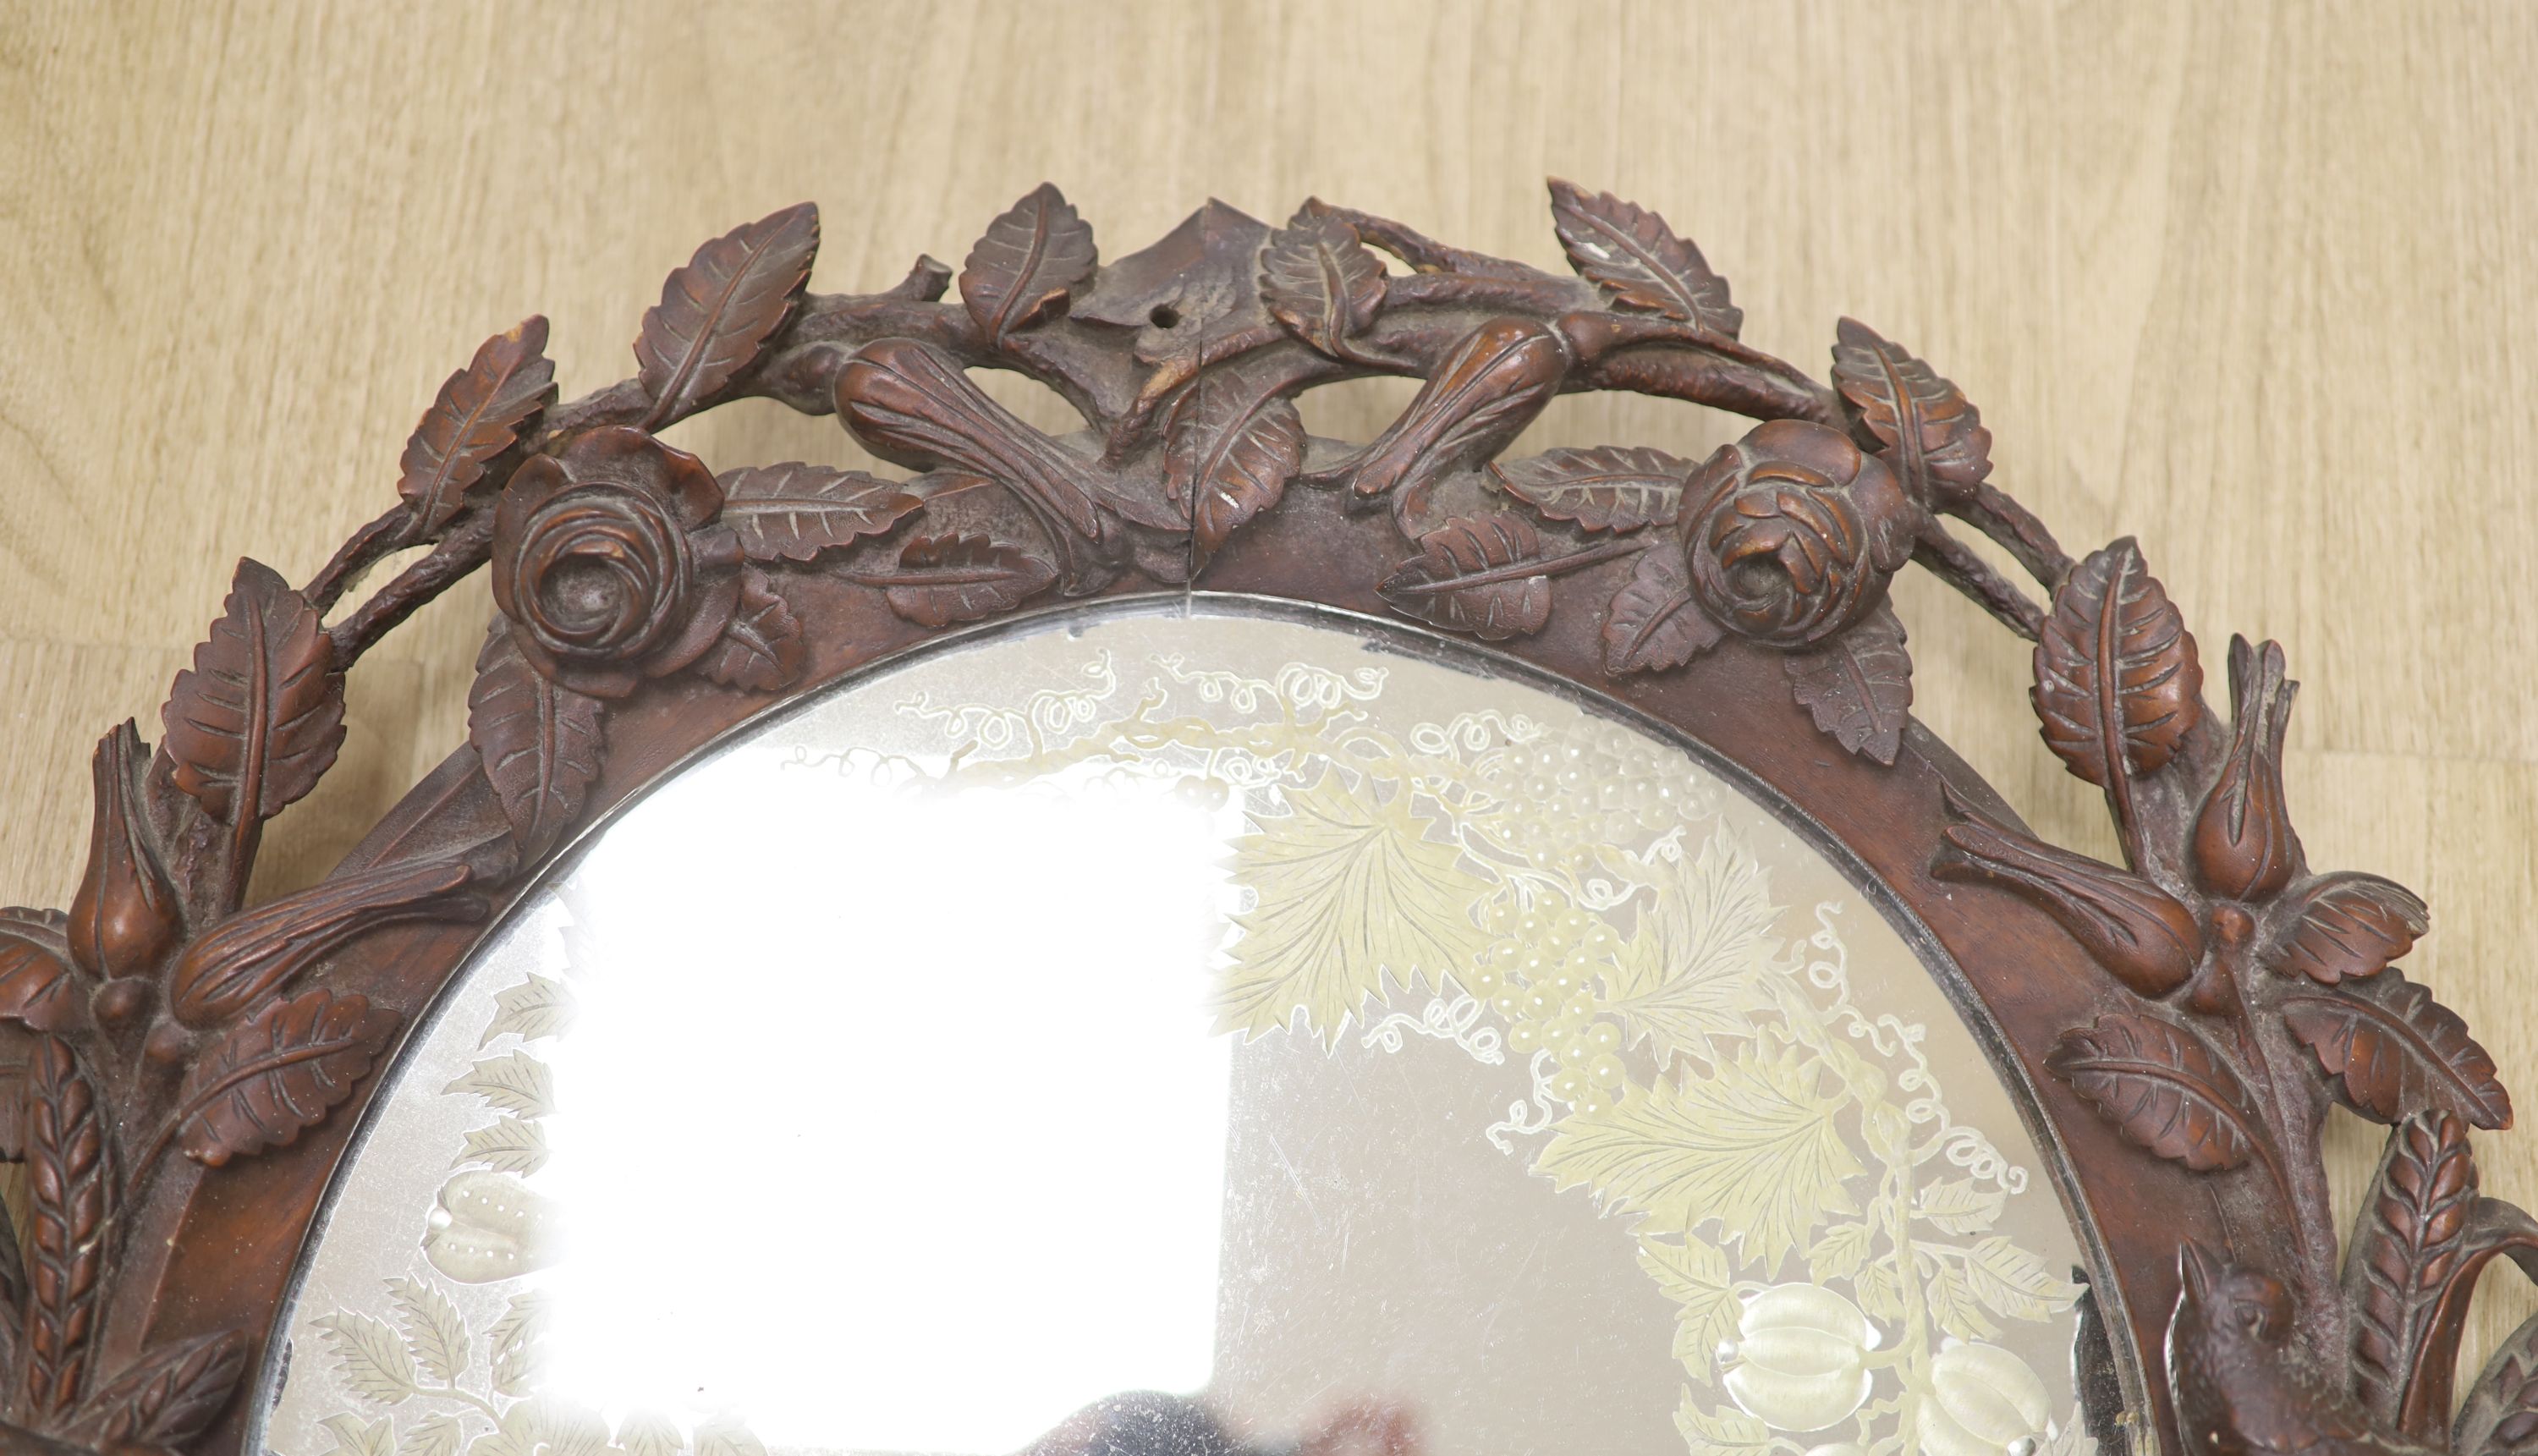 A 19th century Black Forest walnut wall mirror carved with roses and birds, diameter 56cm - Image 3 of 3